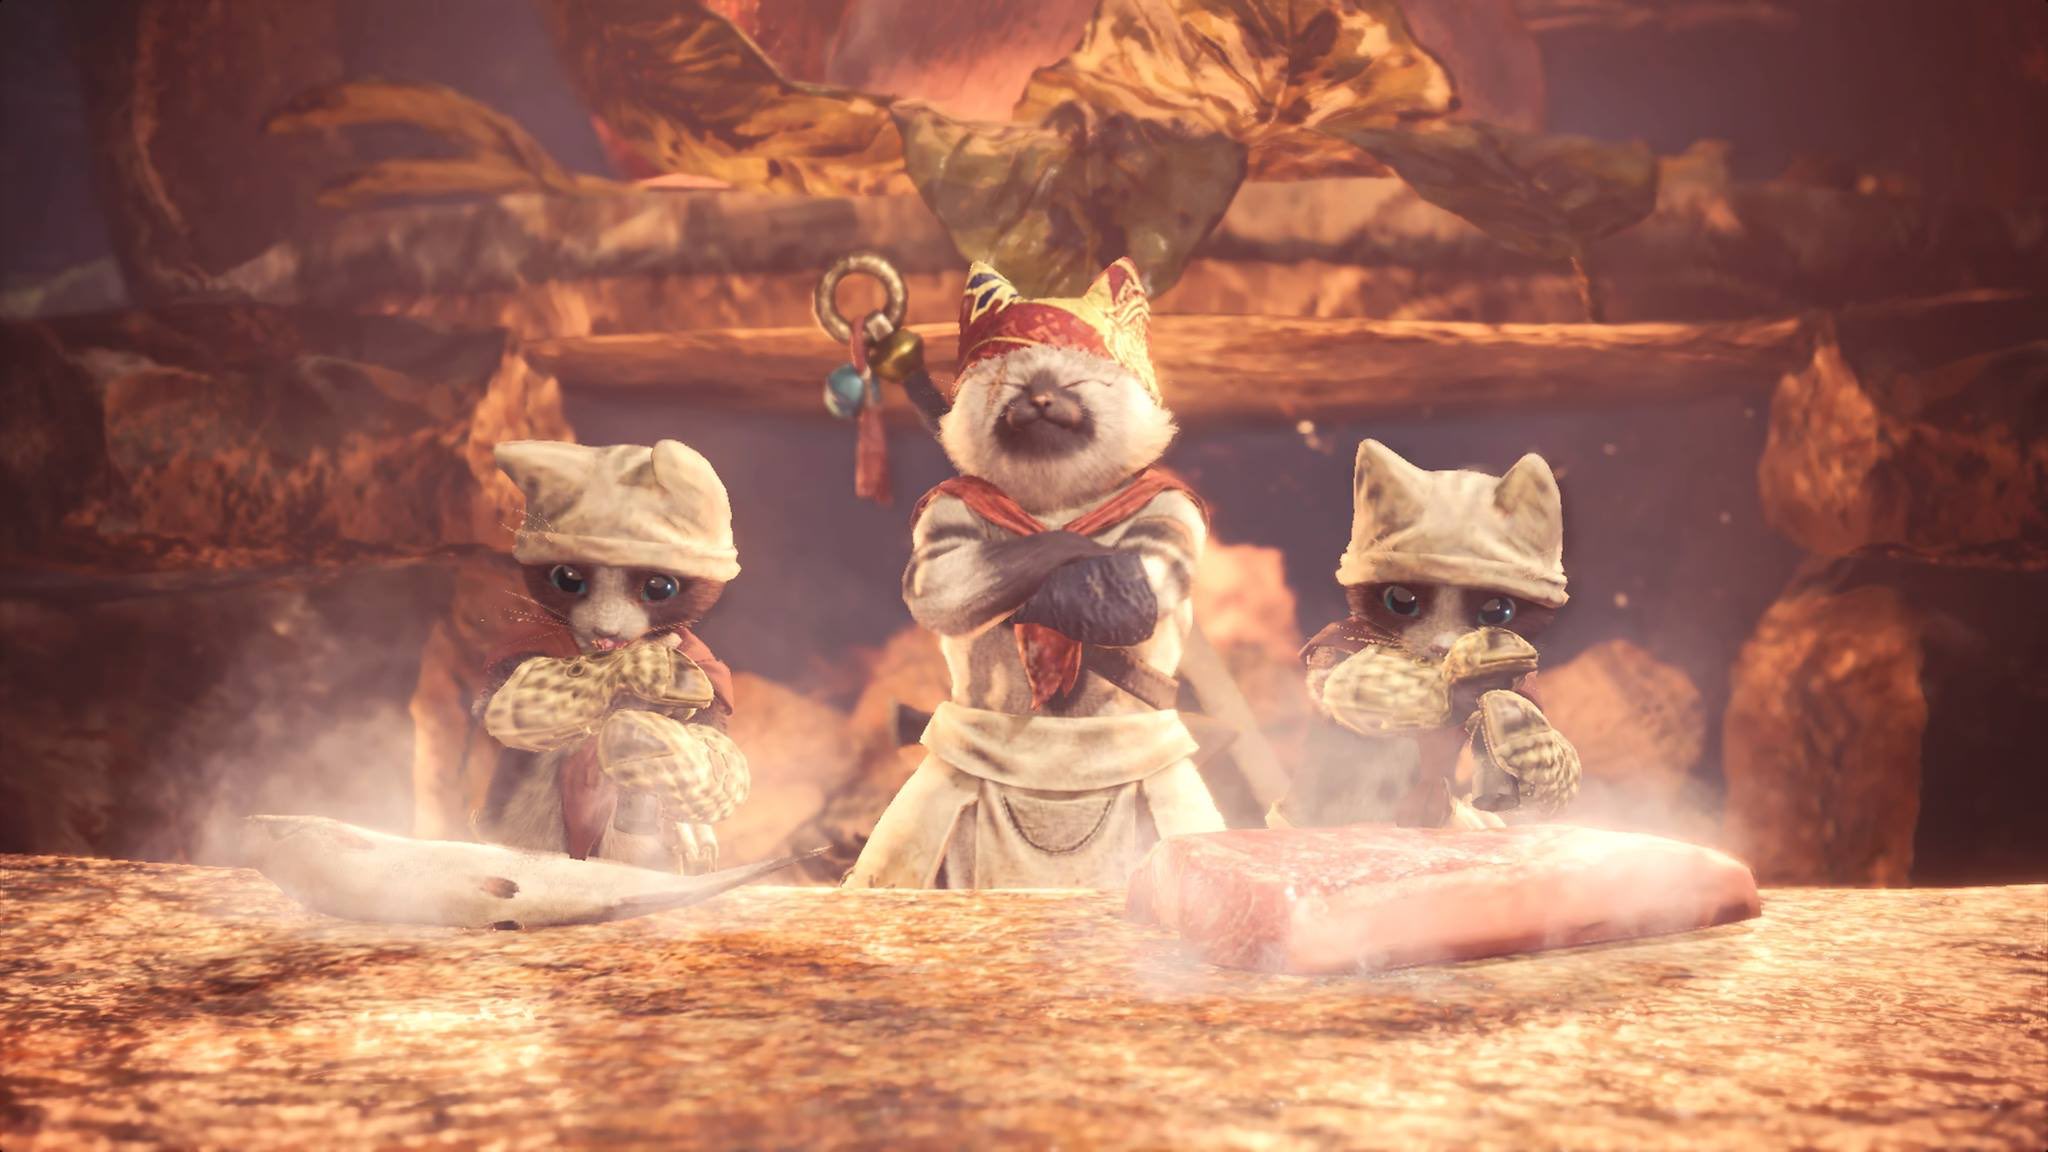  Milla Jovovich and the Meowscular Chef will be buddies in the Monster Hunter movie 